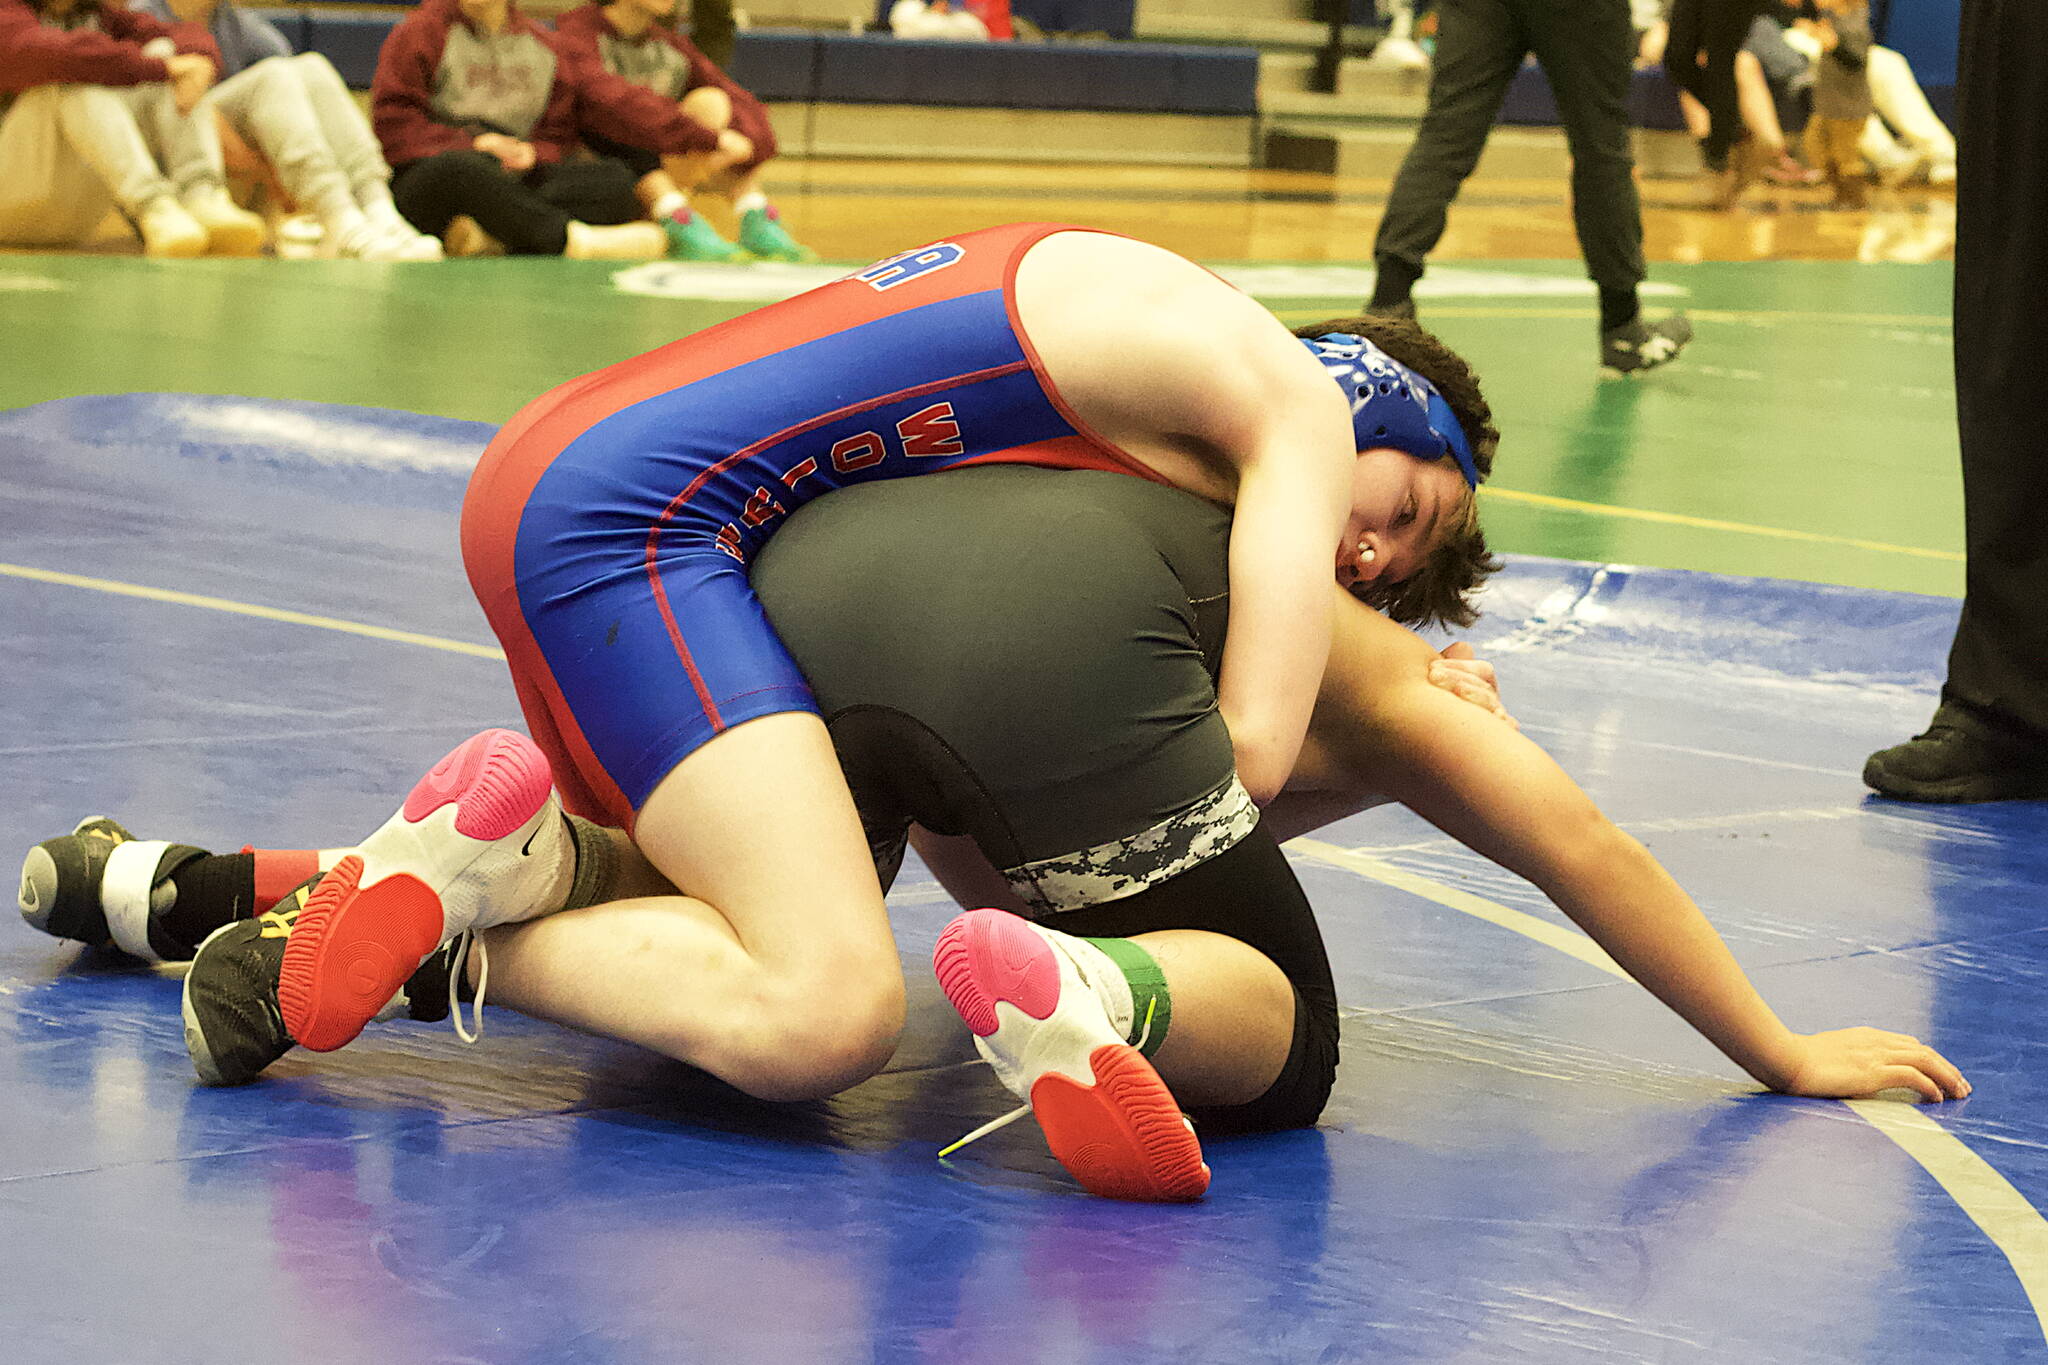 Killan Hammock of Sitka High School, top, after suffering a nose injury, tries to pin Gunner Niere of Thunder Mountain High School during their third-place match in the Southeast Showdown at TMHS on Saturday. Niere won the match to claim third place in the 135-pound division. (Mark Sabbatini / Juneau Empire)